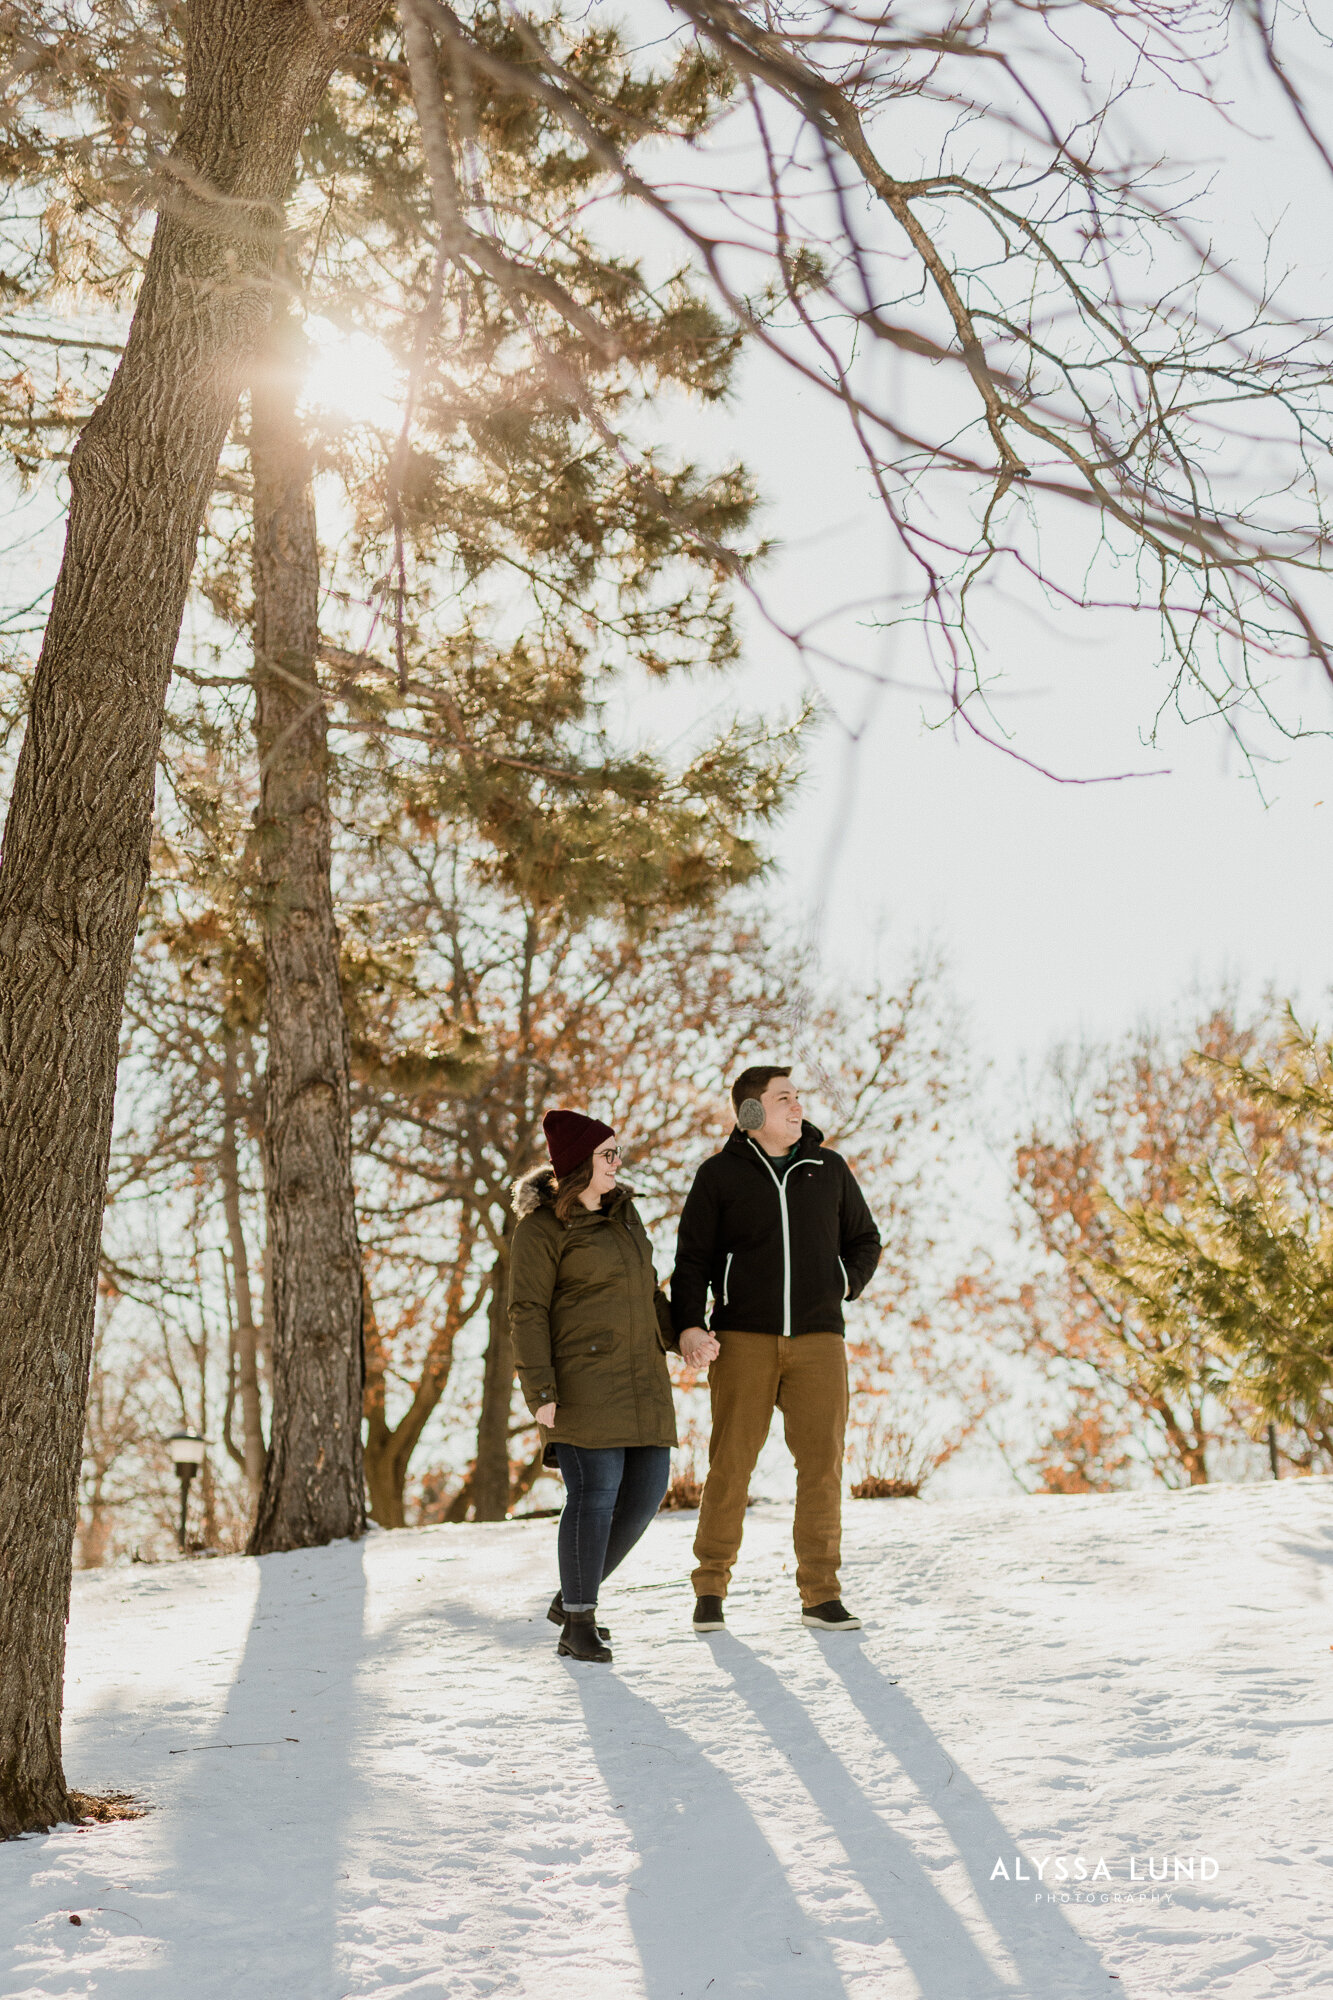 Minnesota outdoor engagement photography in the winter-1.jpg